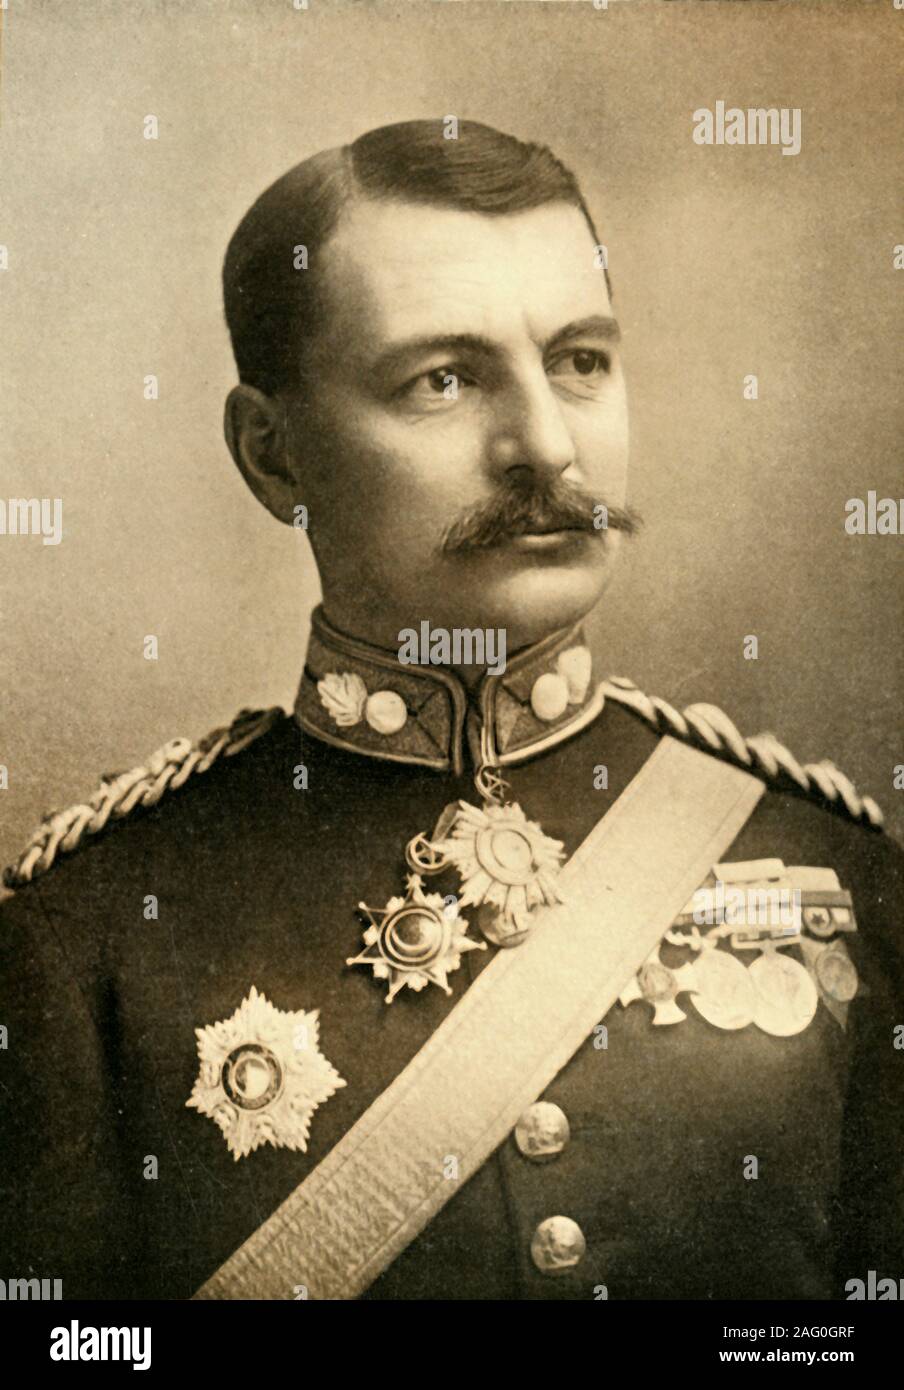 'Lieut.-General Sir H. M. Leslie-Rundle, K.C.B.', 1901. Leslie Rundle (1856-1934)  British Army general during the Second Boer War commanding the 8th Division of the South African Field Force,.  From &quot;South Africa and the Transvaal War, Vol. V&quot;, by Louis Creswicke. [T. C. &amp; E. C. Jack, Edinburgh, 1901] Stock Photo